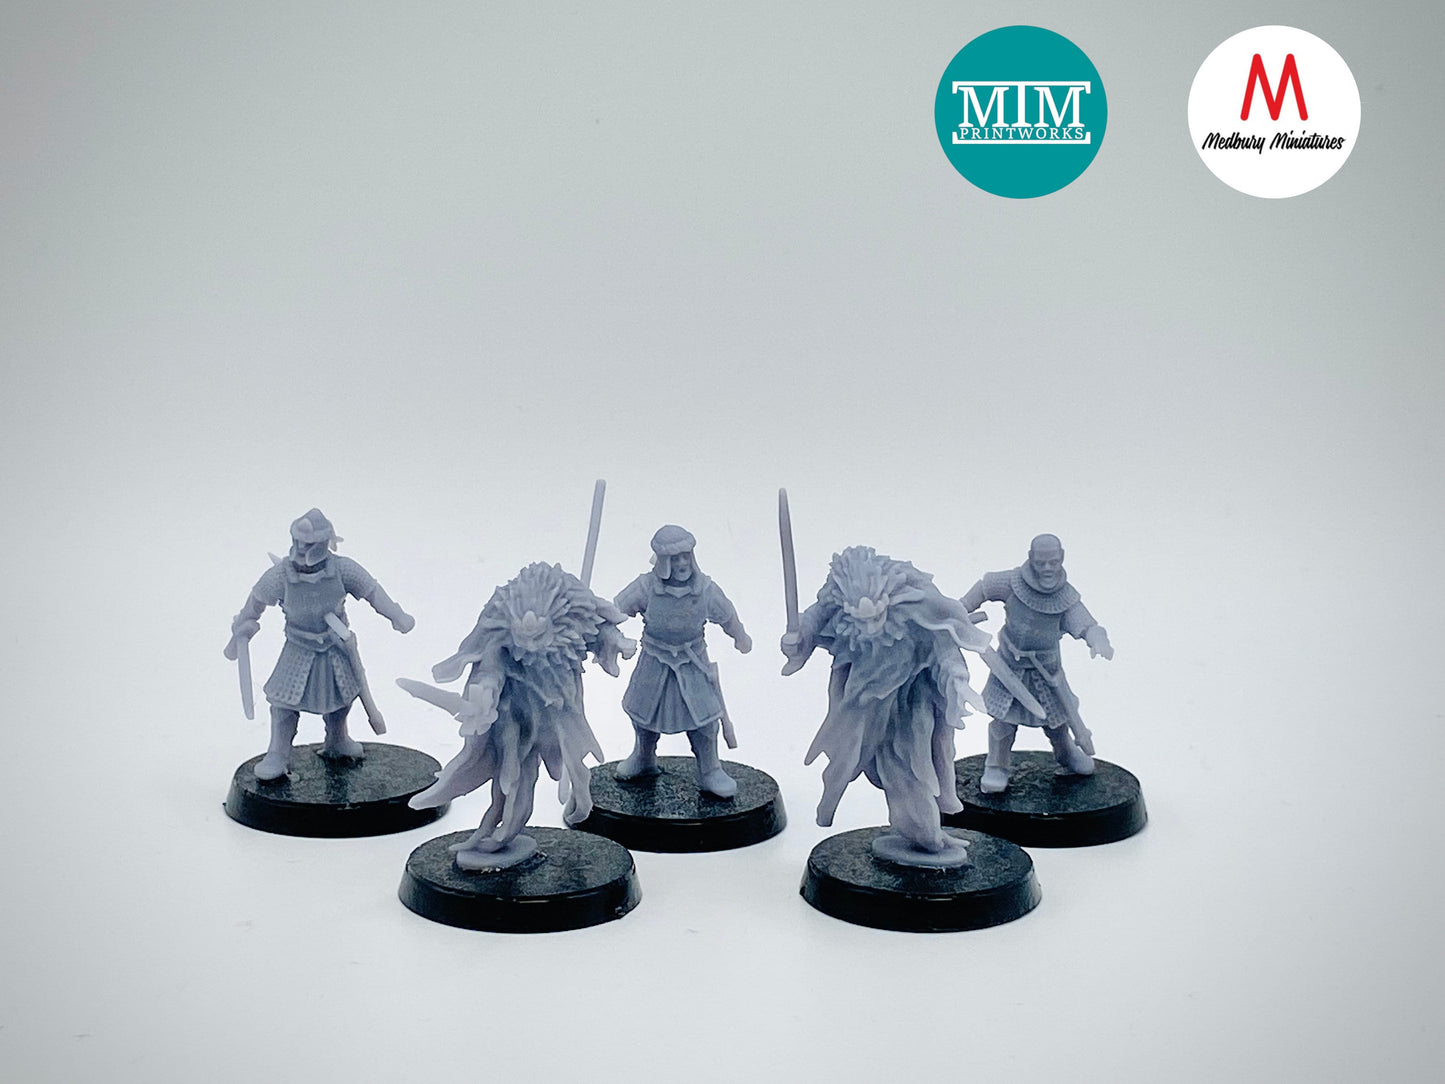 Northern Wights and Spectres